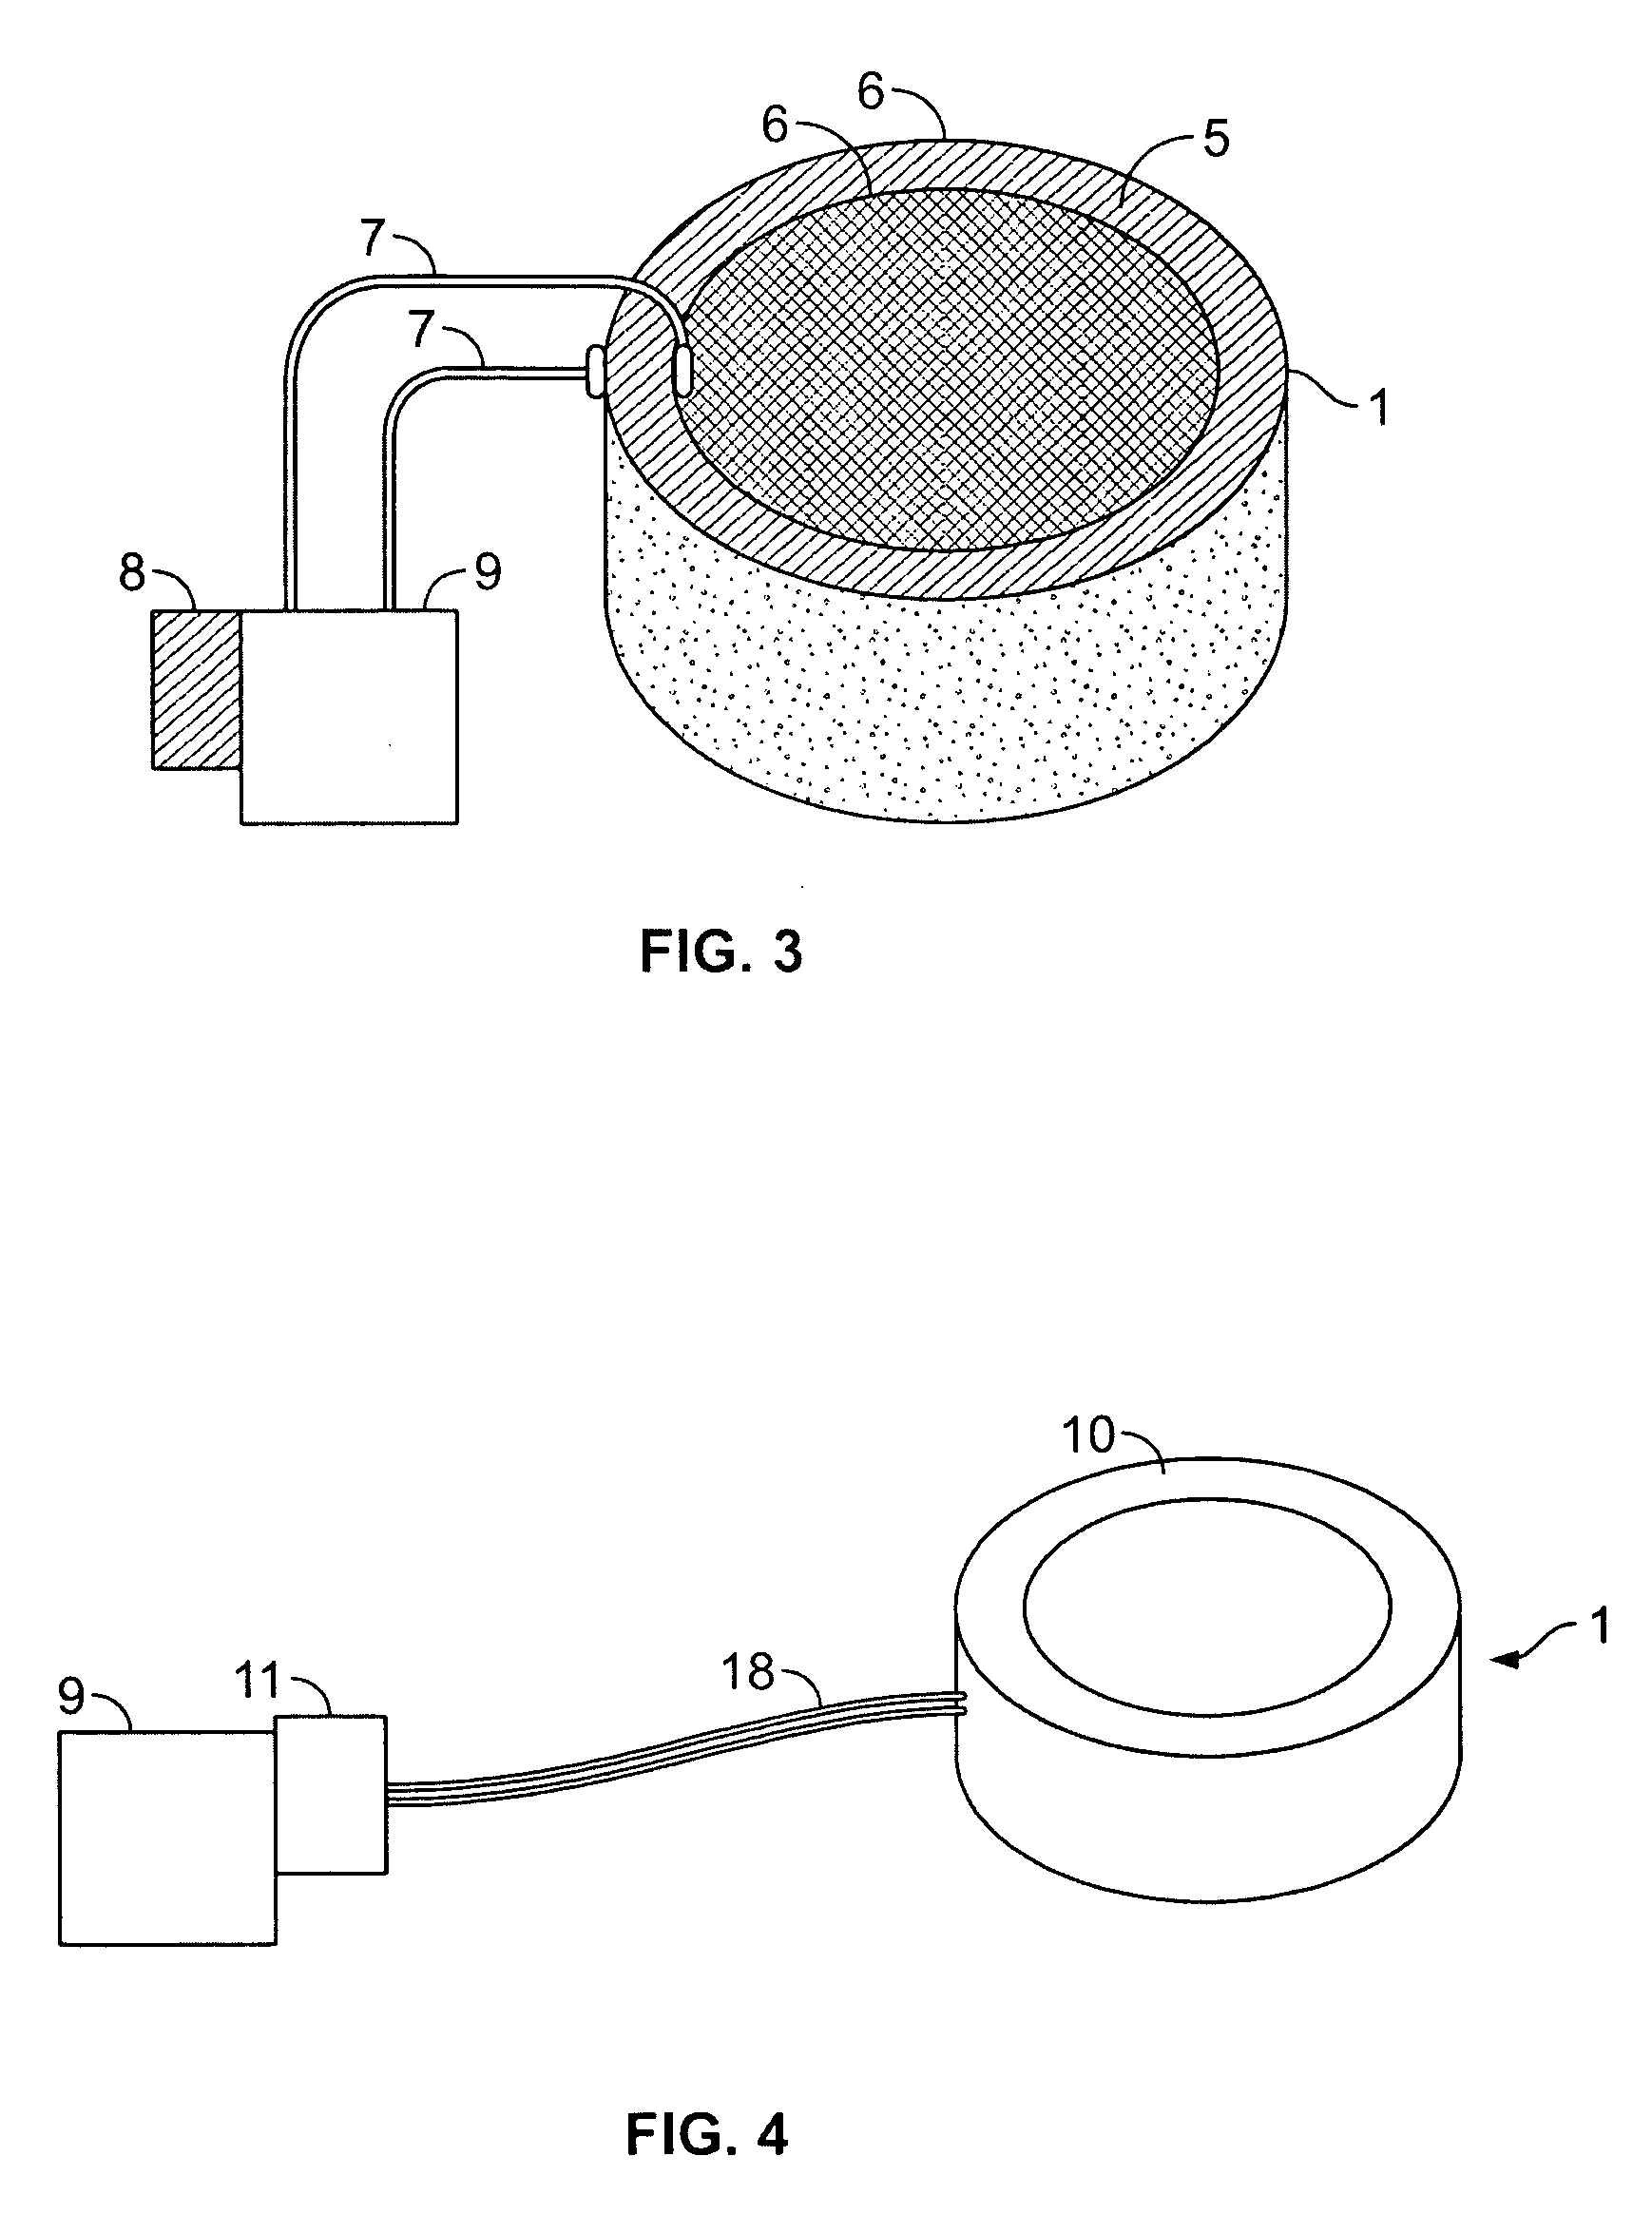 Method and device for counteracting hypotension